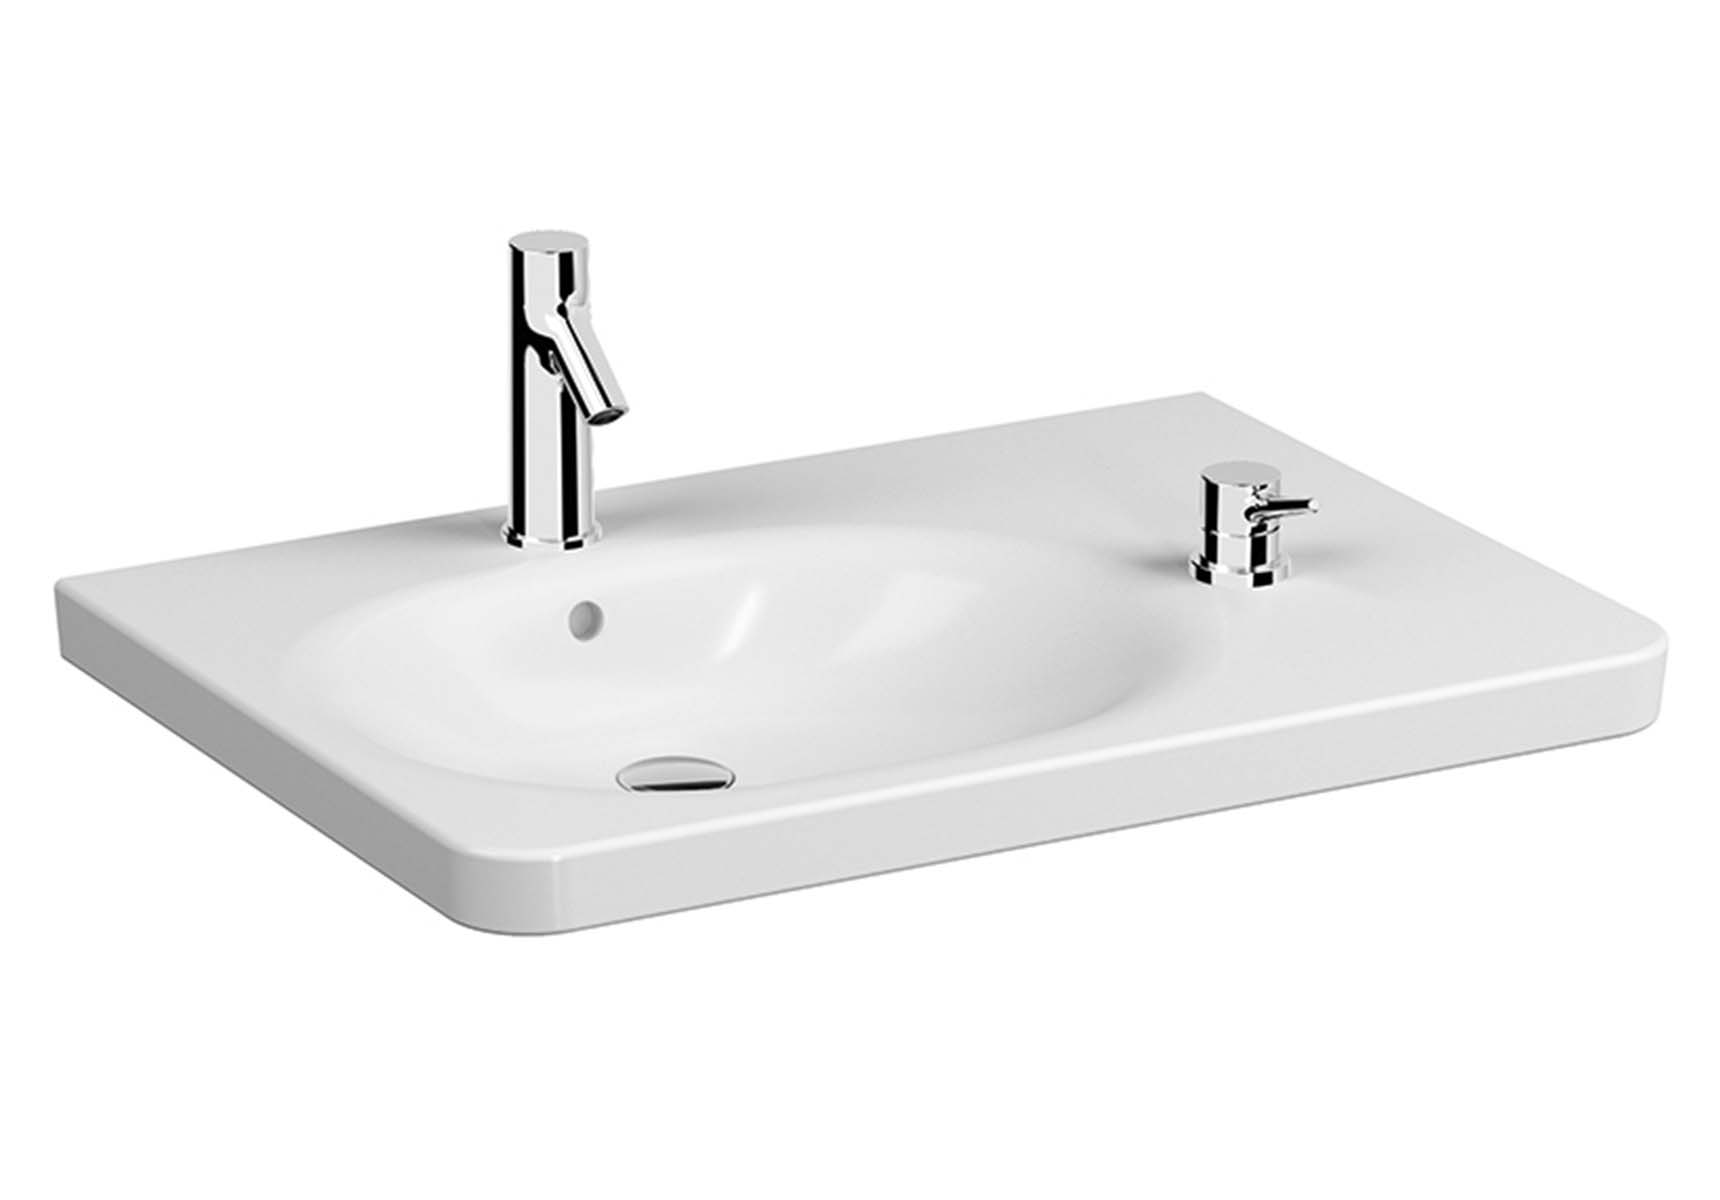 Special Need's Asymmetrical washbasin, 80 cm, with two tap hole, with overflow hole , white, A47156EXP thermostatic faucet set is included